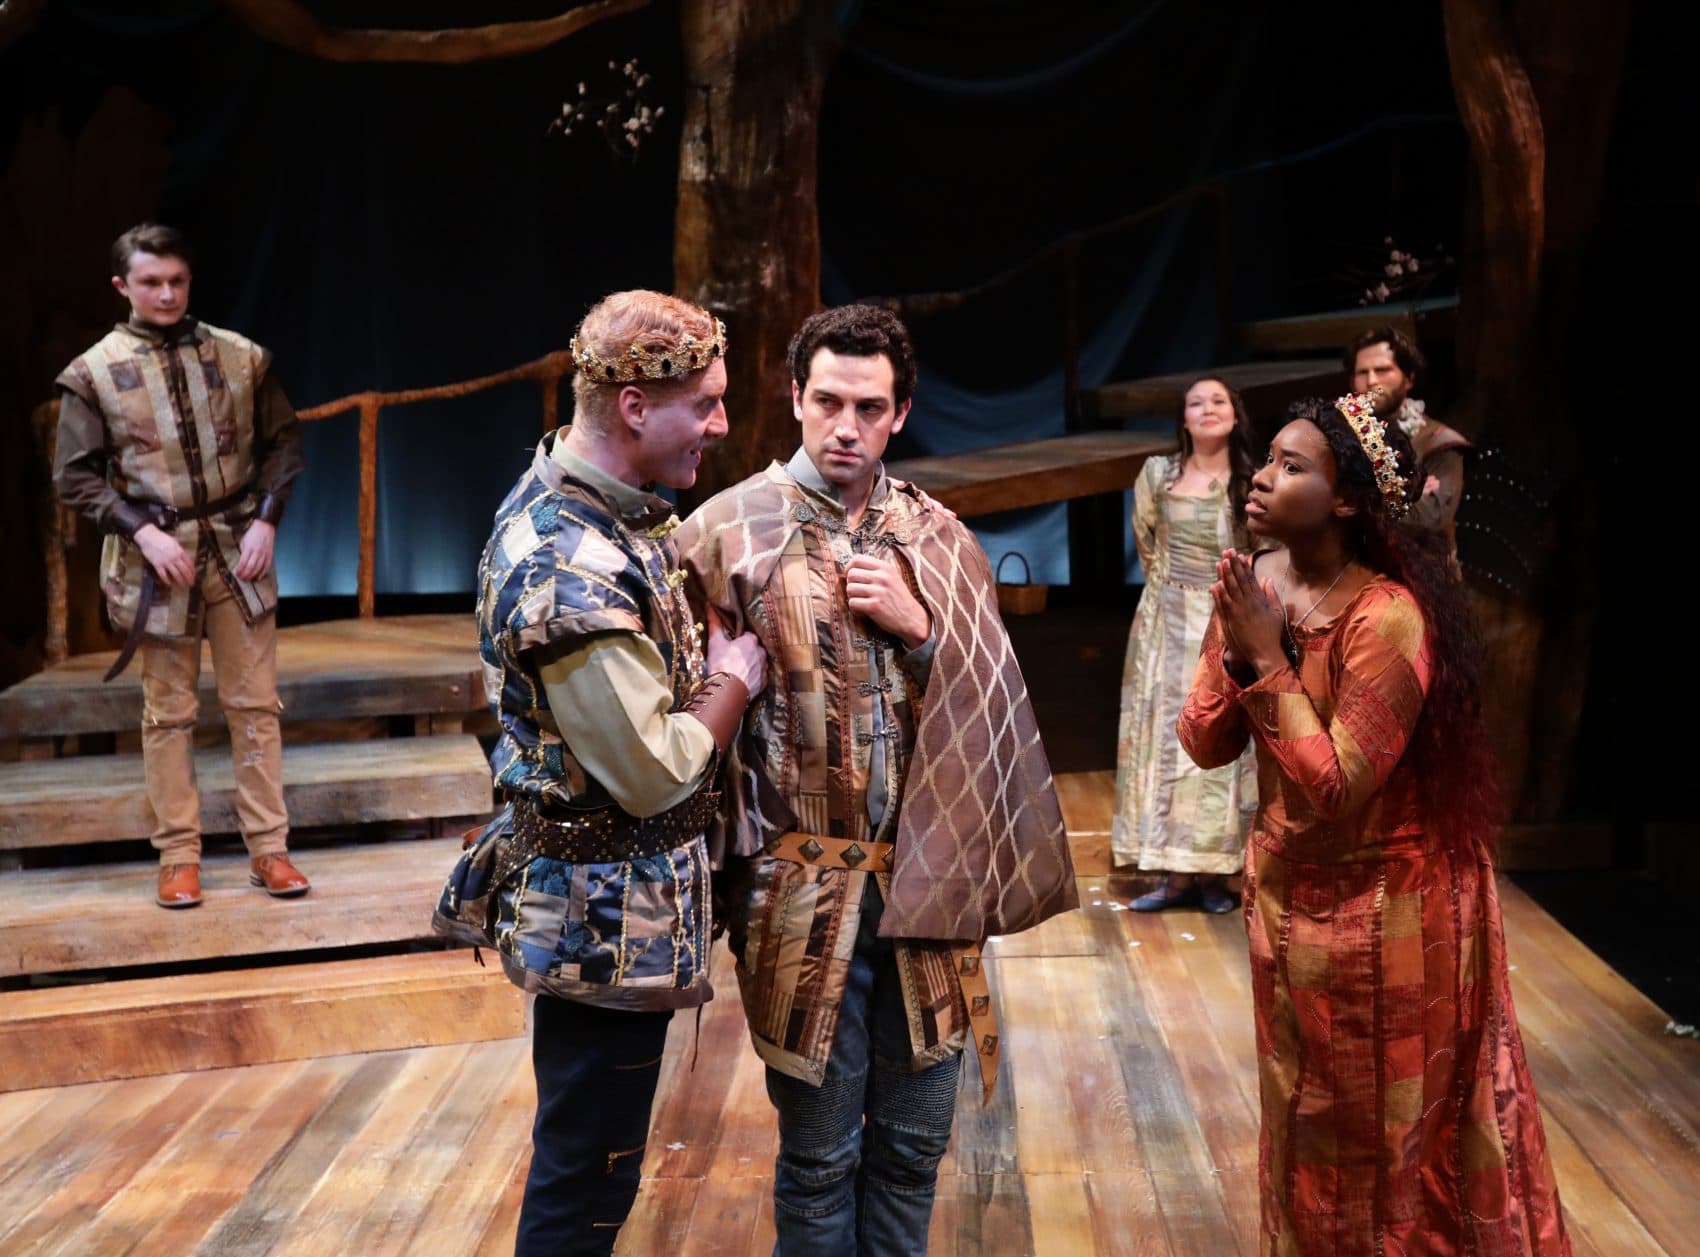 Ed Hoopman as King Arthur, Jared Troilo as Sir Lancelot and Maritza Bostic as Lady Guenevere in &quot;Camelot.&quot; (Courtesy Mark S. Howard/Lyric Stage)